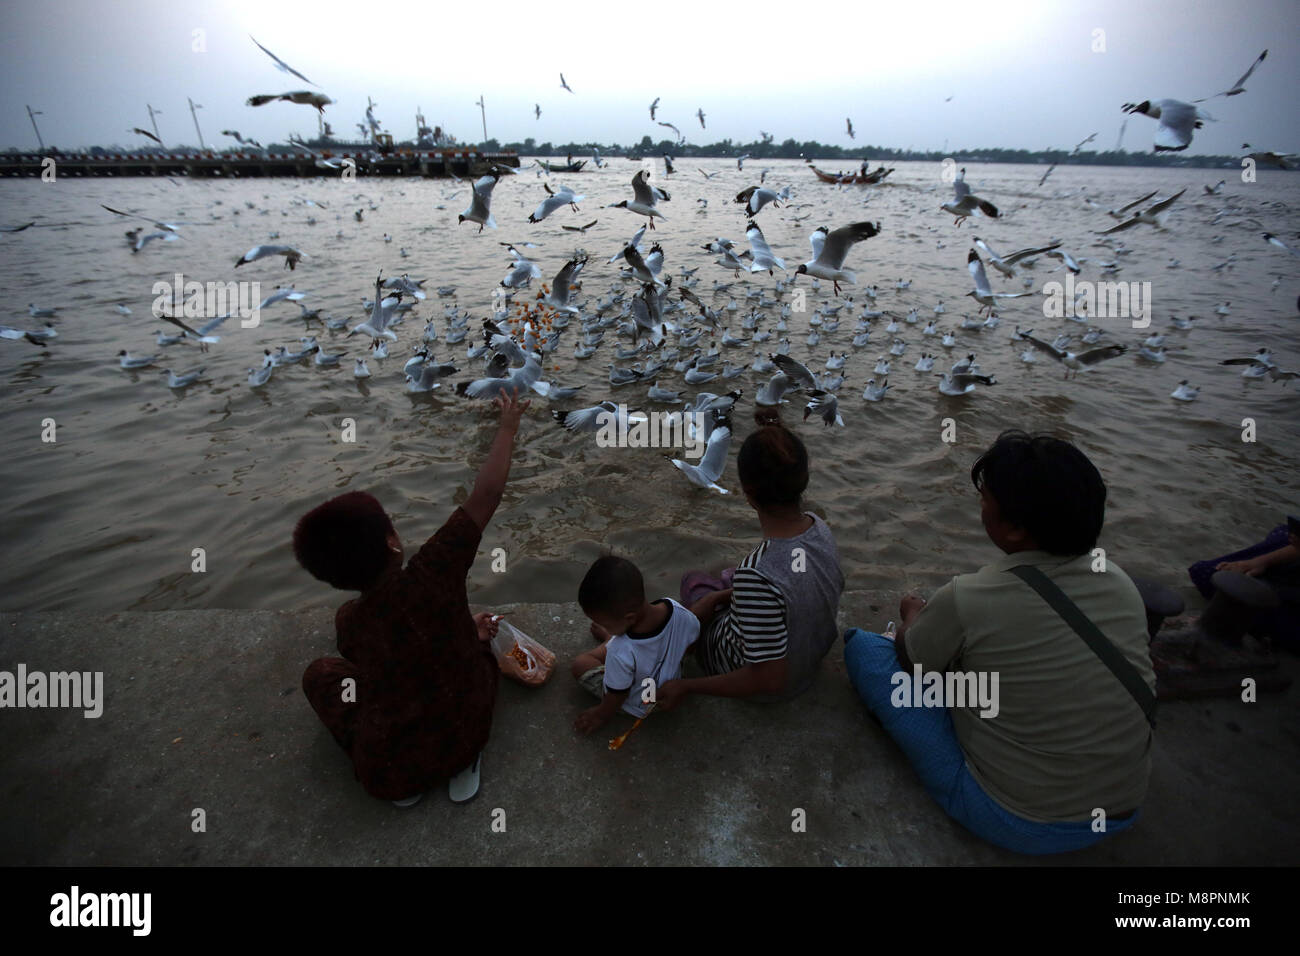 (180319) -- YANGON, March 19, 2018 (Xinhua) -- A family feeds seagulls at a jetty in Yangon, March 19, 2018. (Xinhua/U Aung)  (zf) Stock Photo